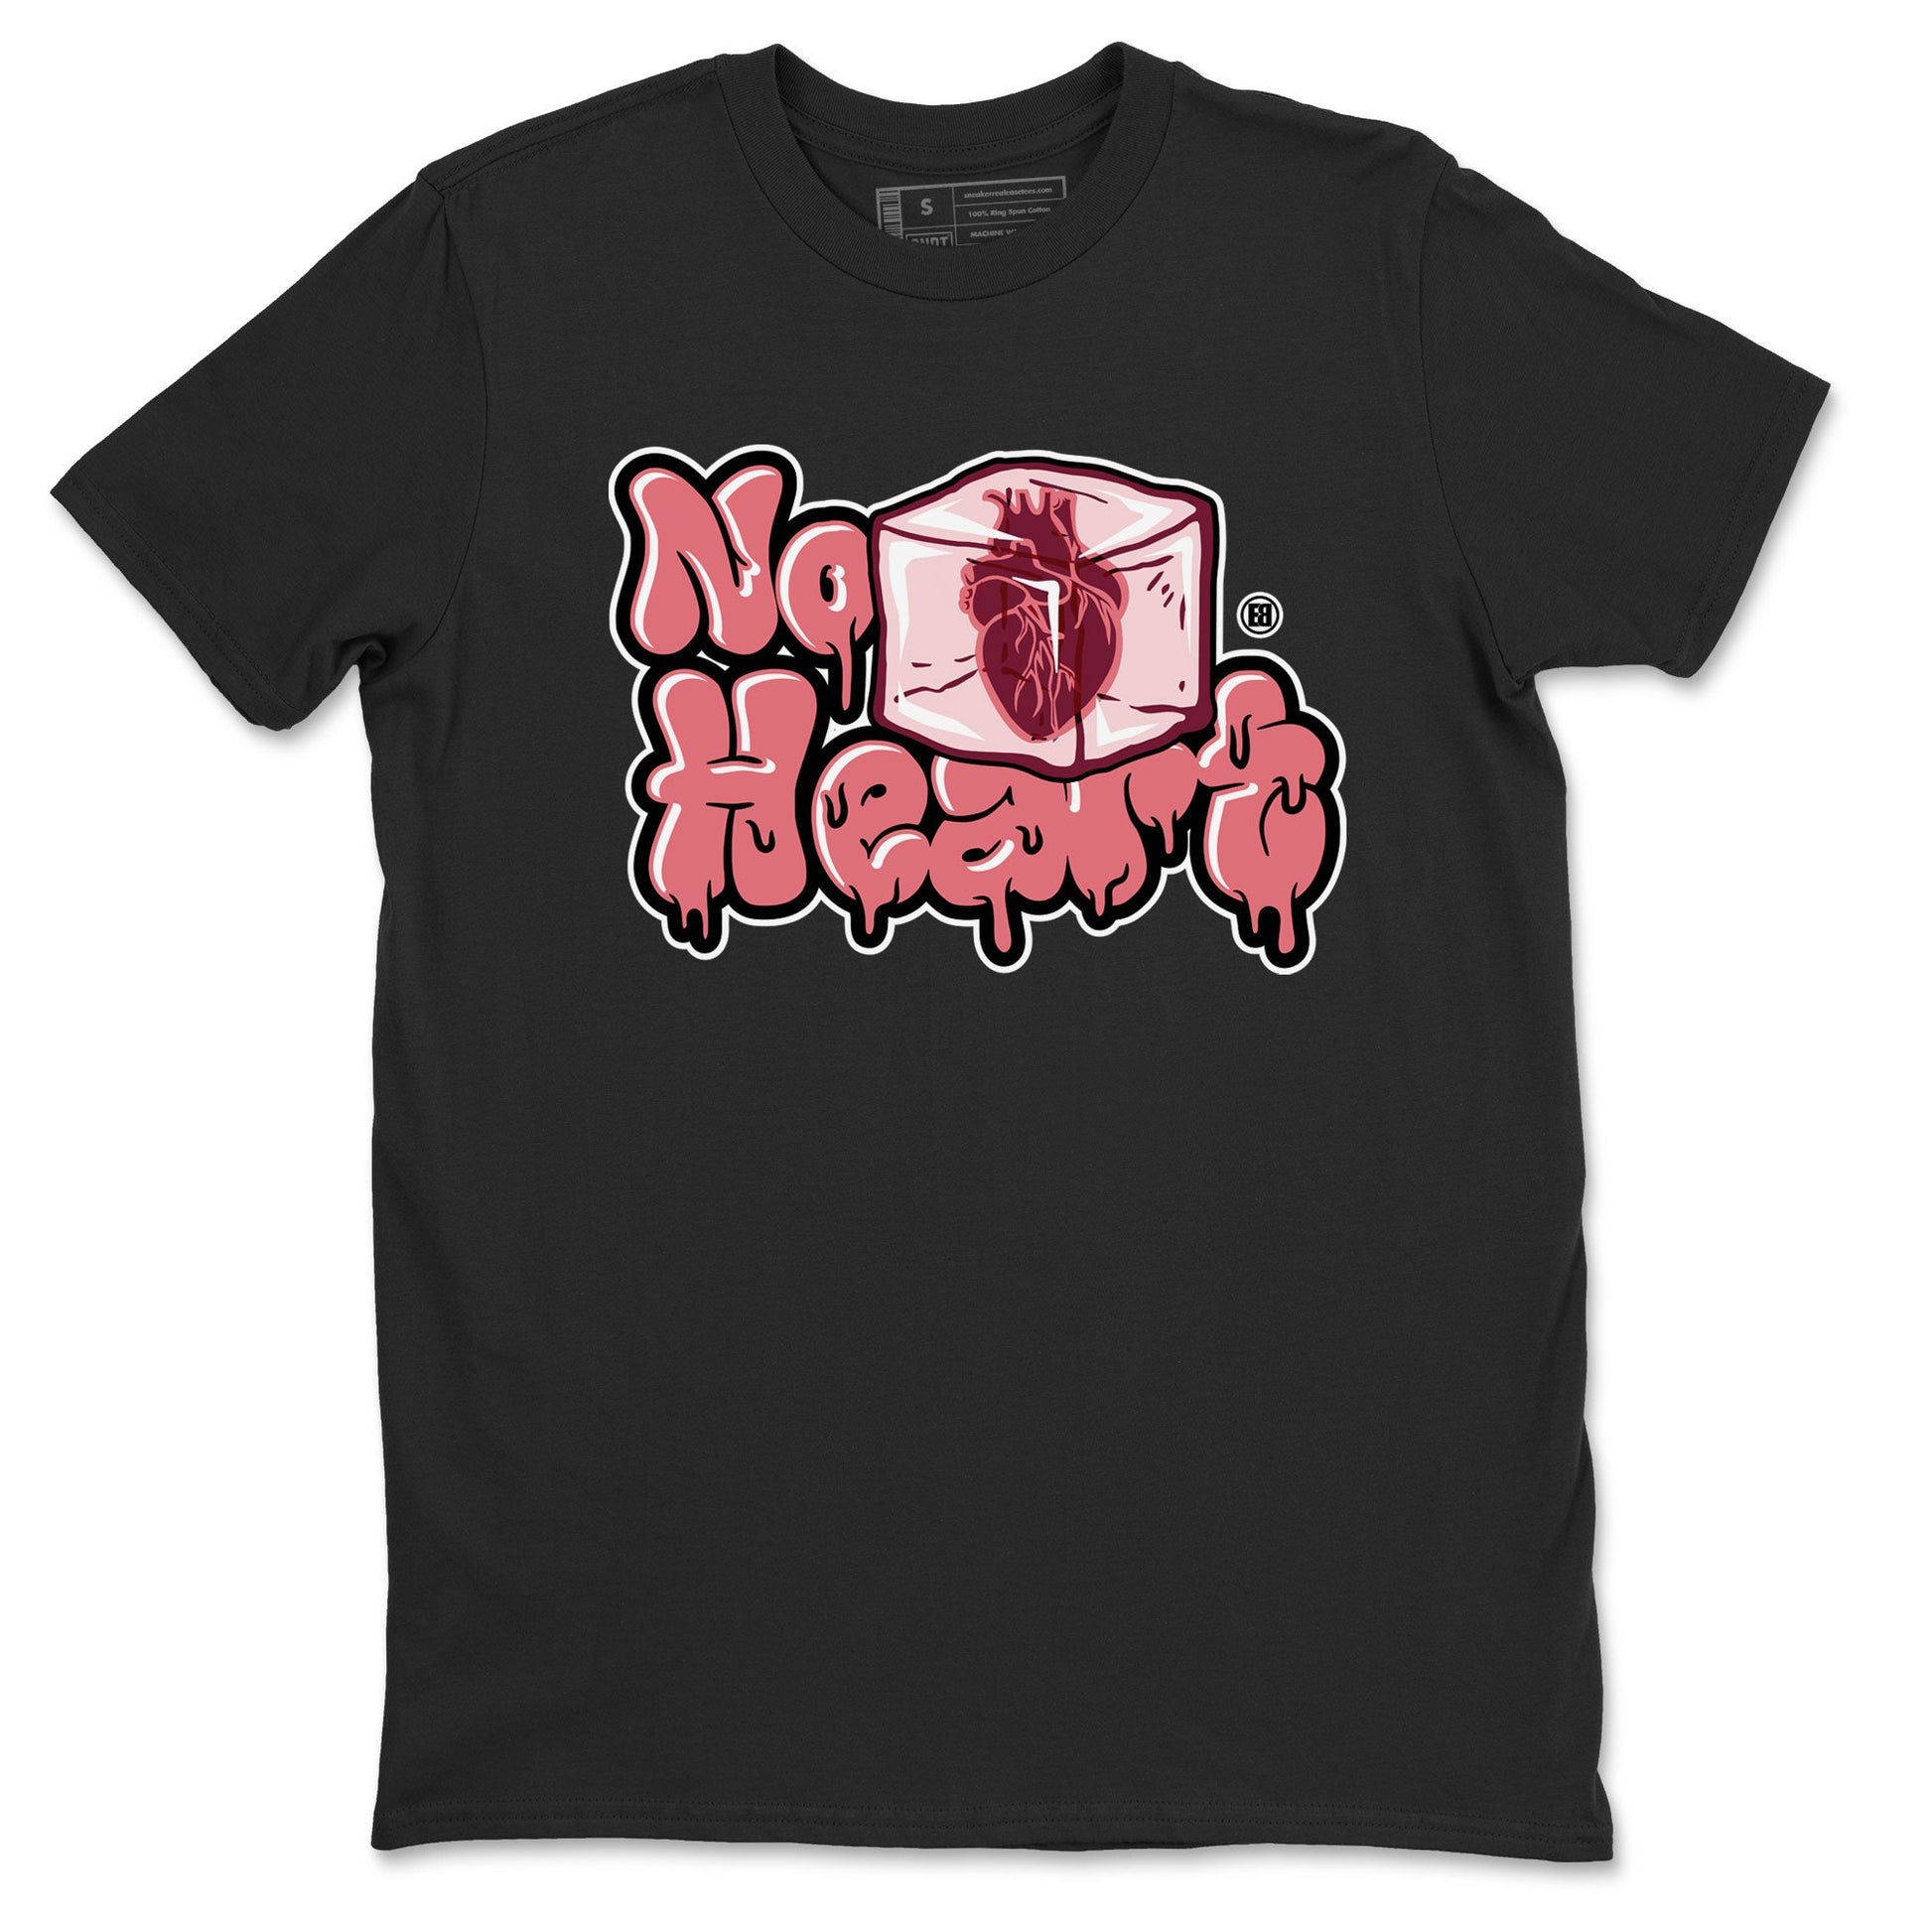 Dunk Valentines Day shirt to match jordans No Hearts sneaker tees Dunk Low Valentine's Day SNRT Sneaker Release Tees Cotton Sneaker Tee Black 2 T-Shirt